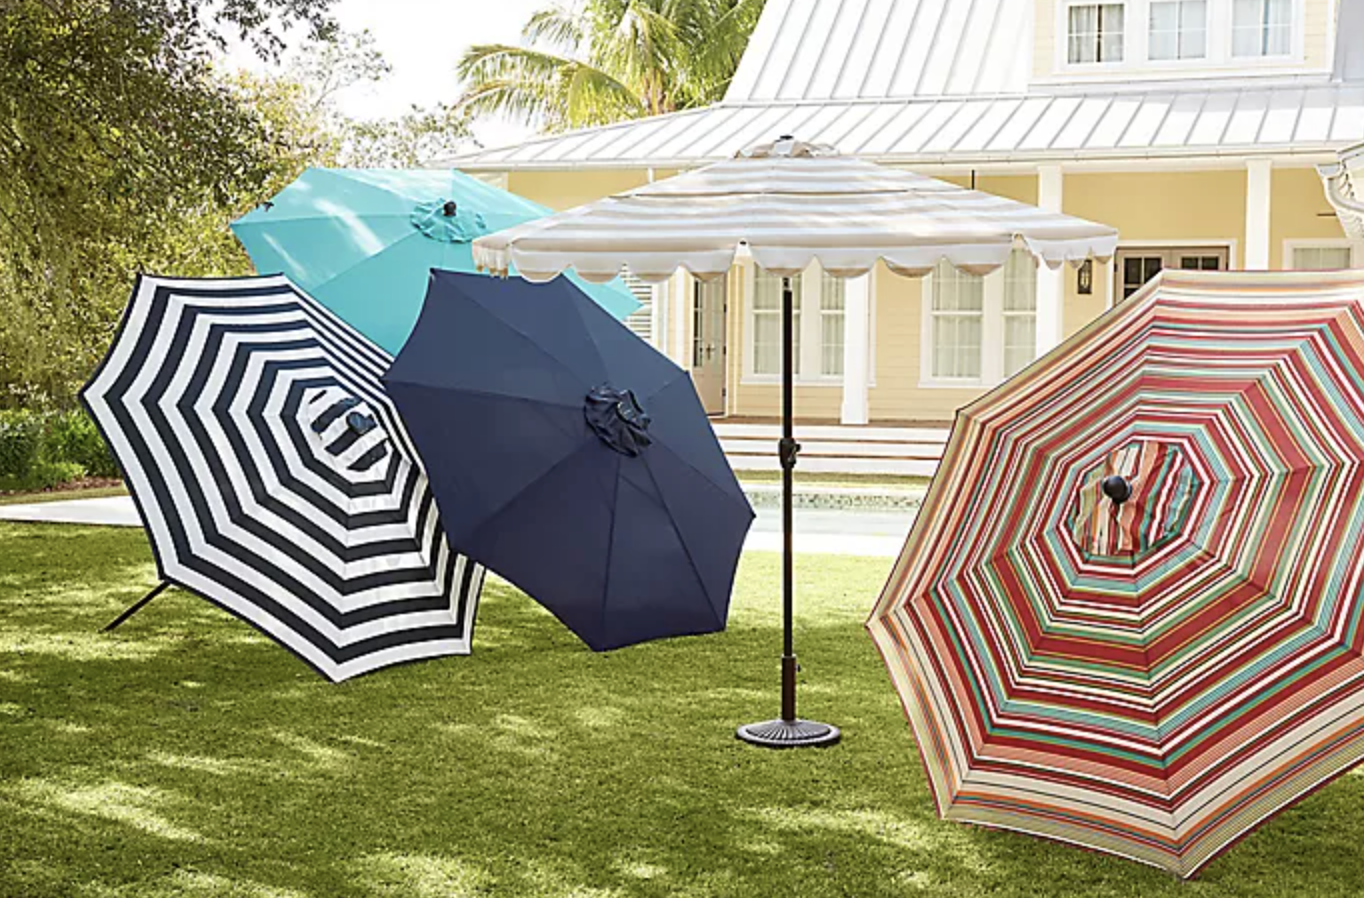 three of the umbrellas lying on a grass lawn